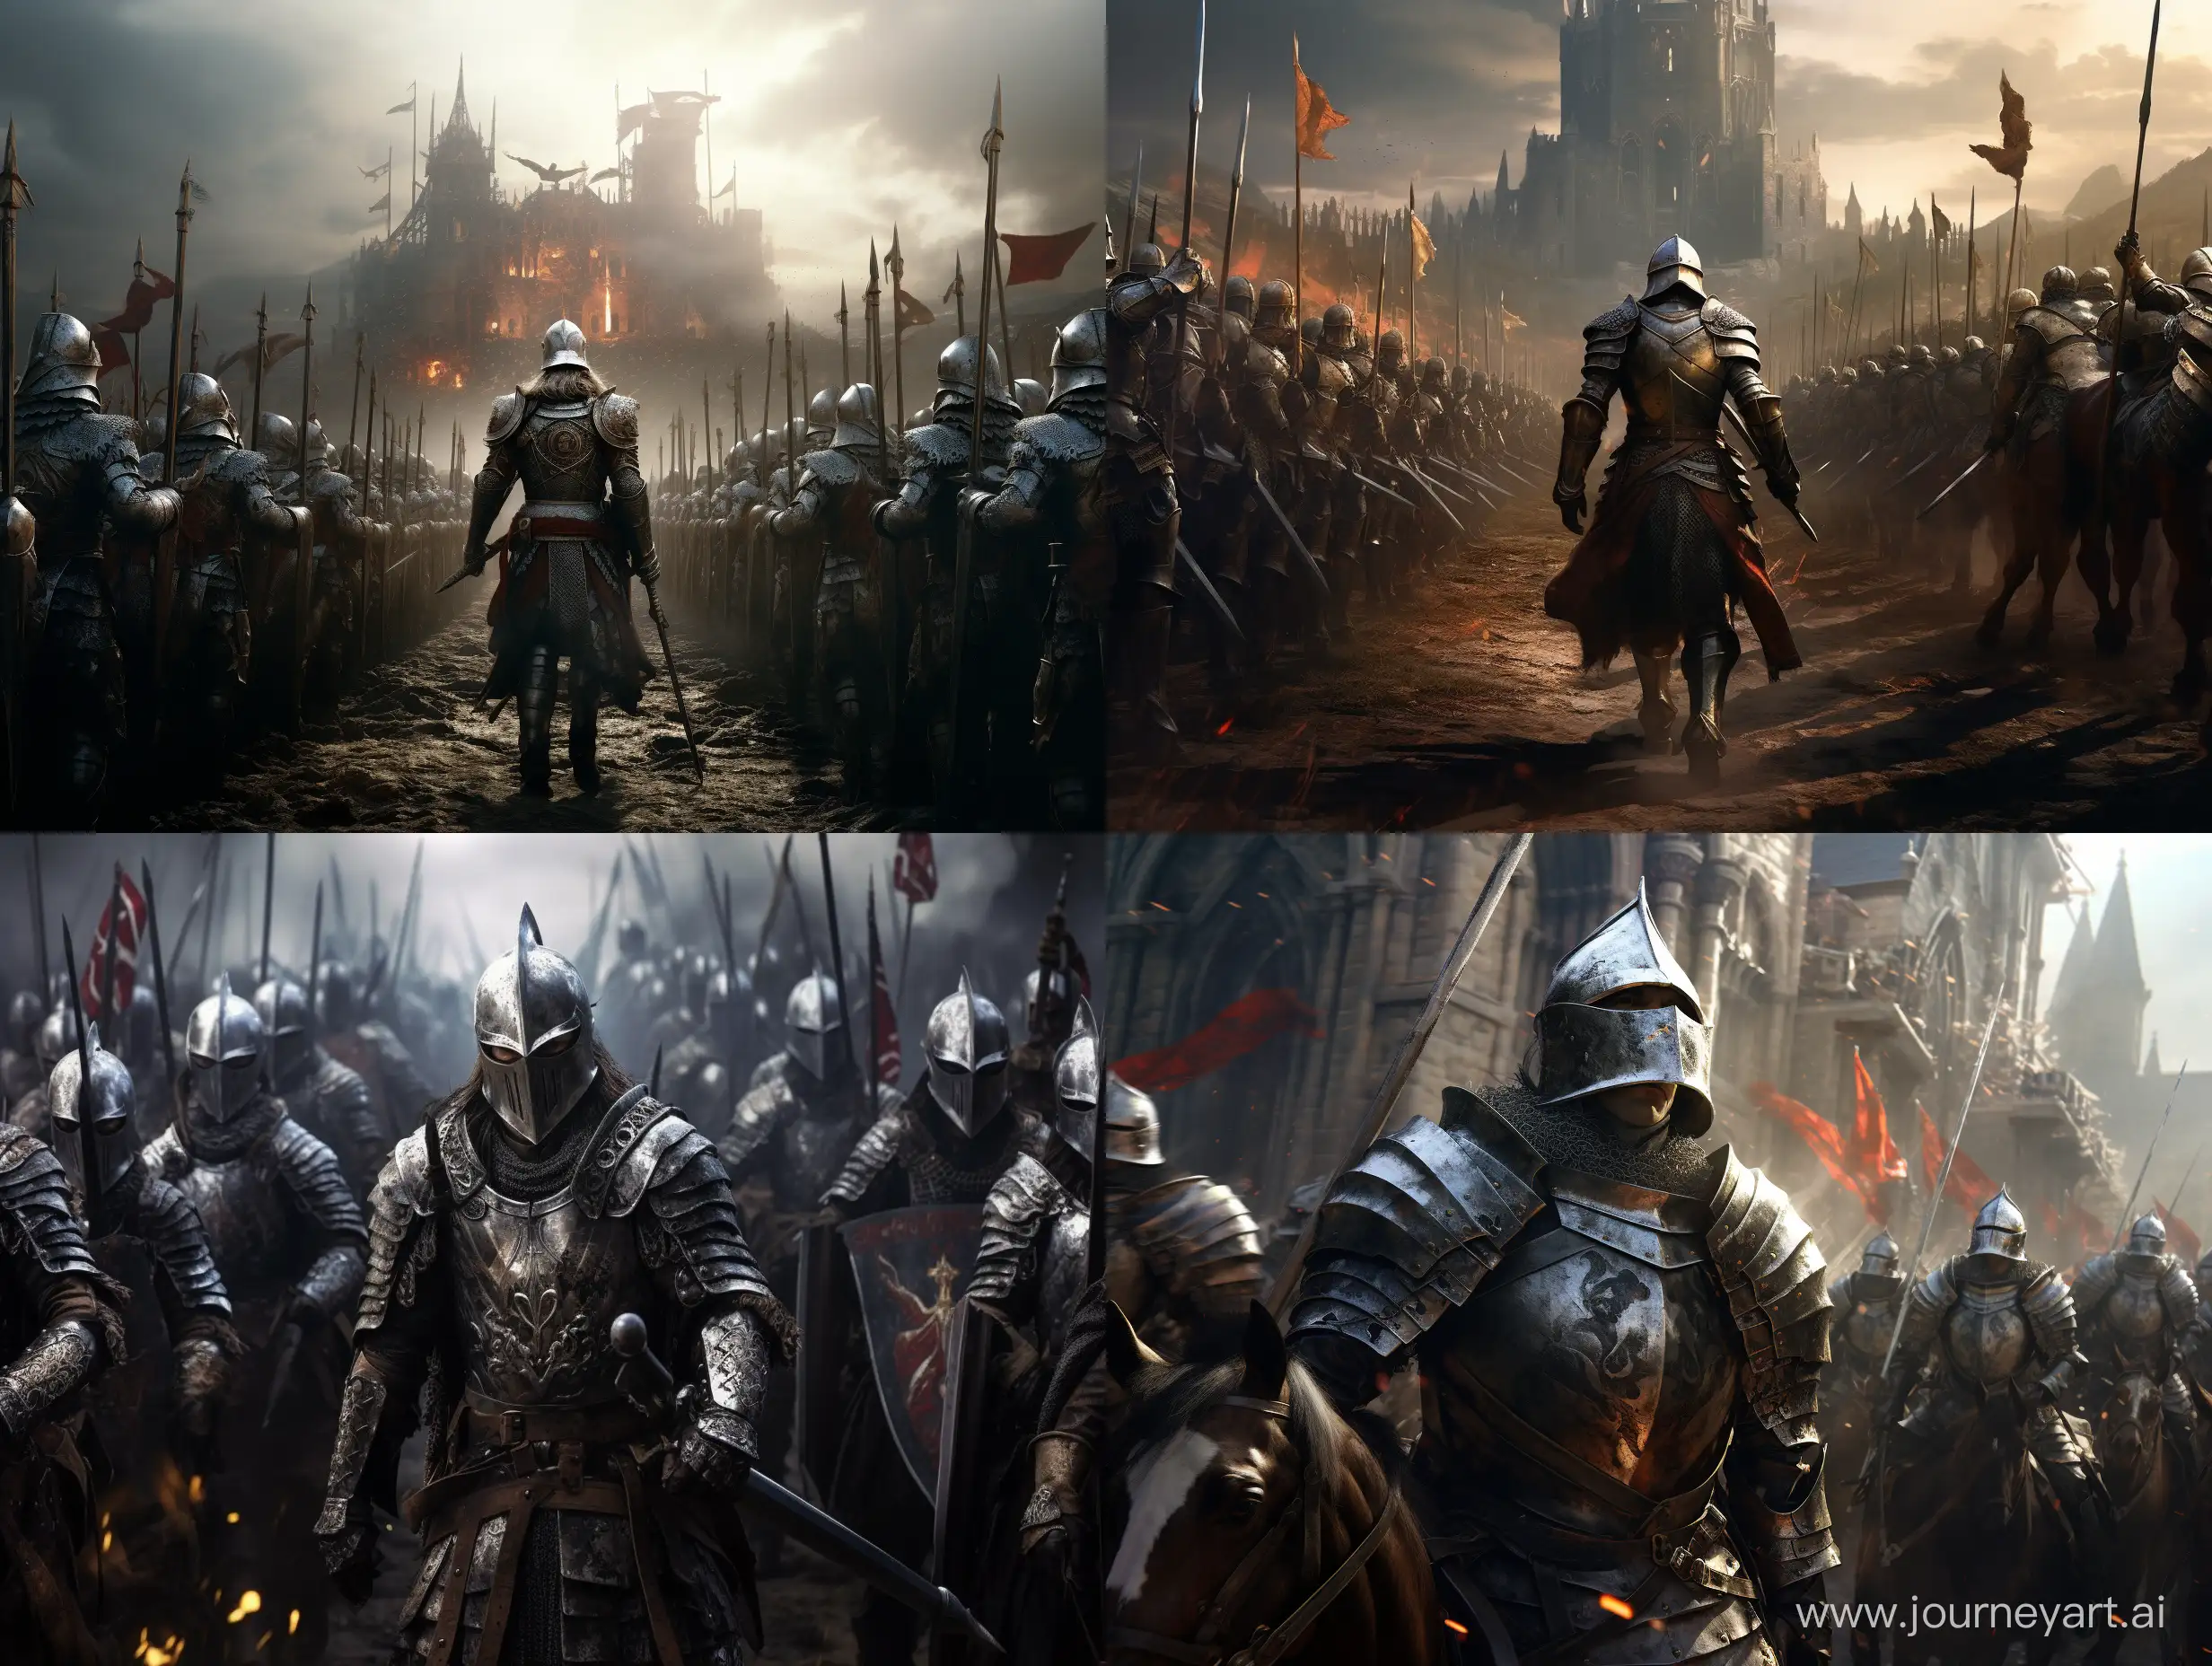 The medieval army, ,epic
